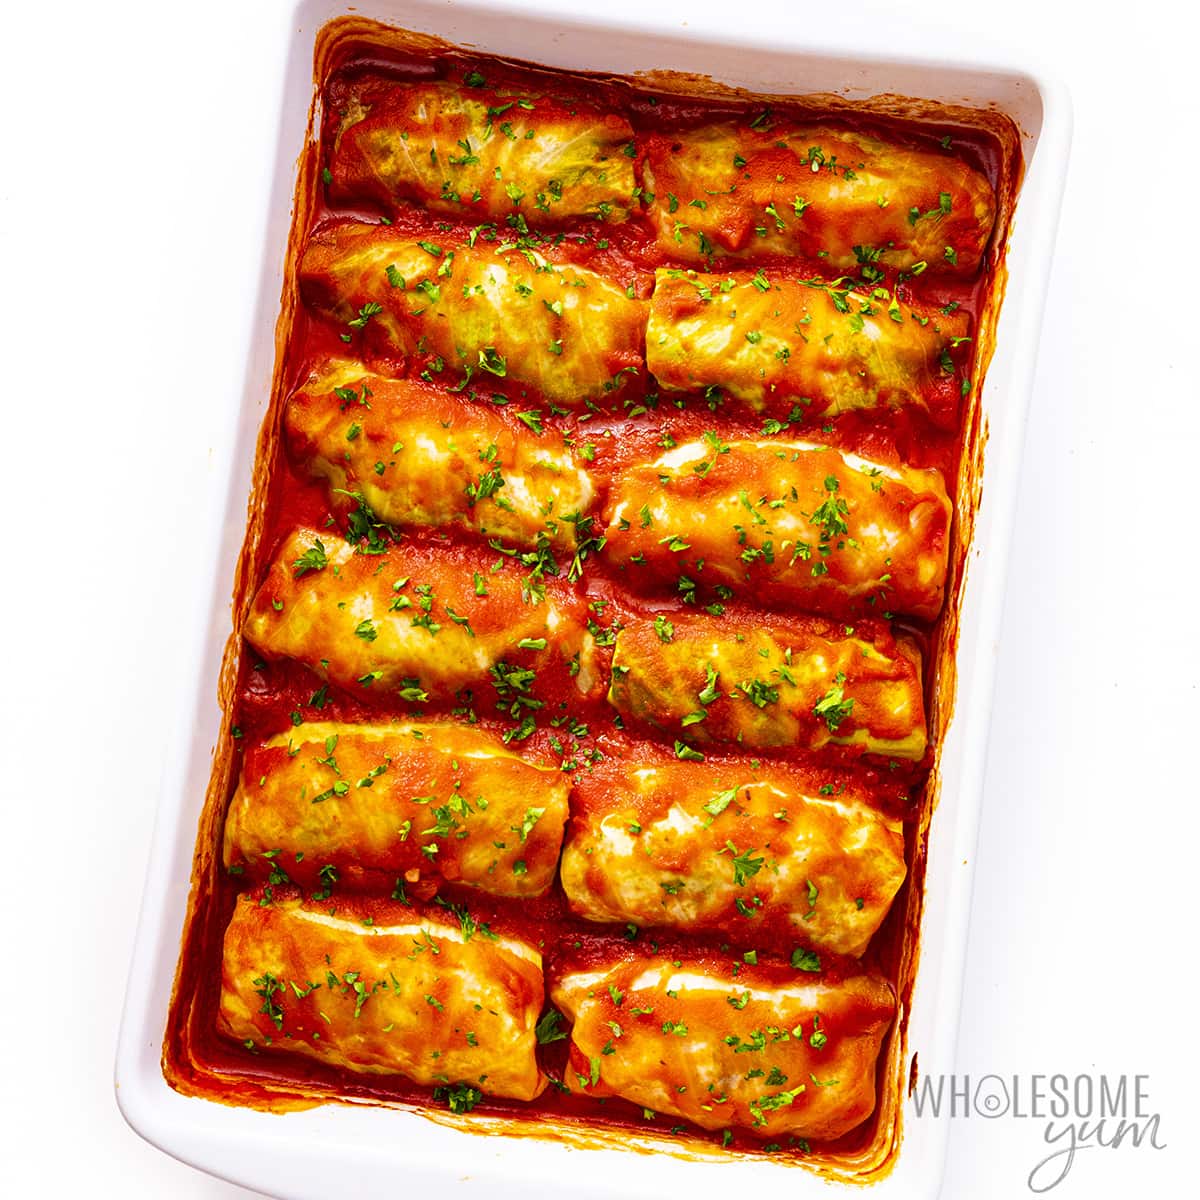 Baked stuffed cabbage rolls in a baking dish, with parsley for garnish.